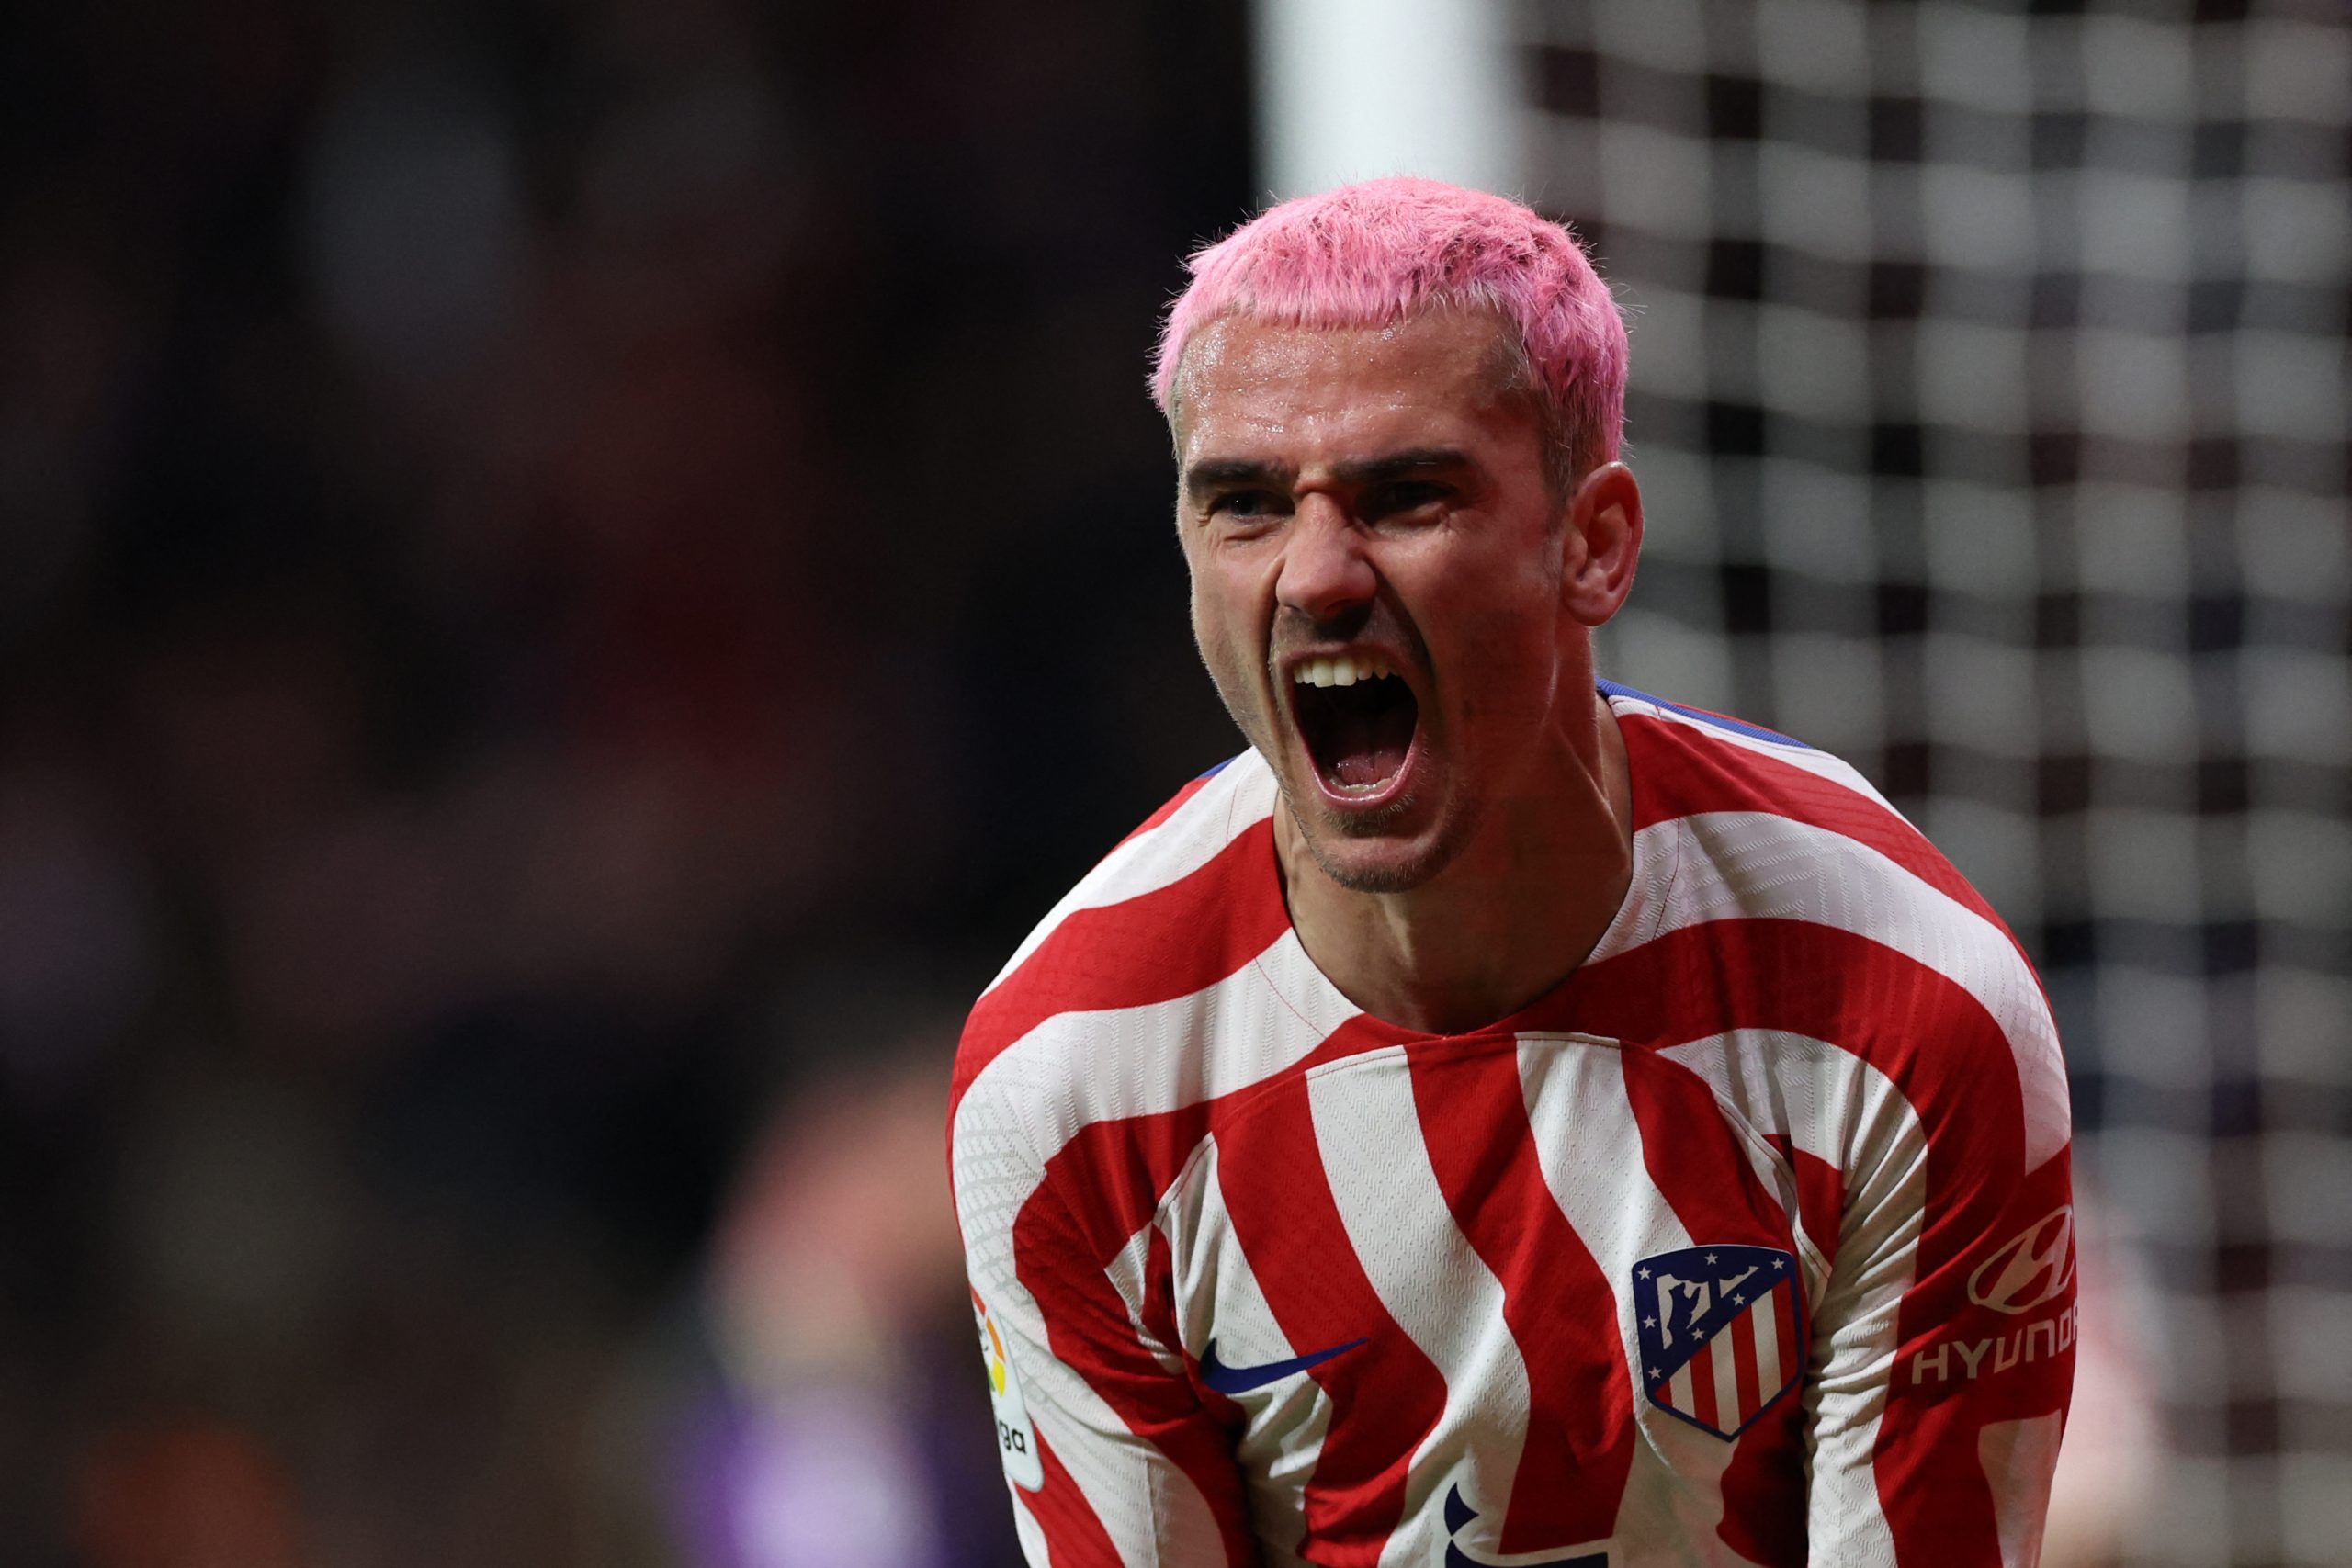 Antoine Griezmann deal 'explored' by Manchester United during Casemiro negotiations.